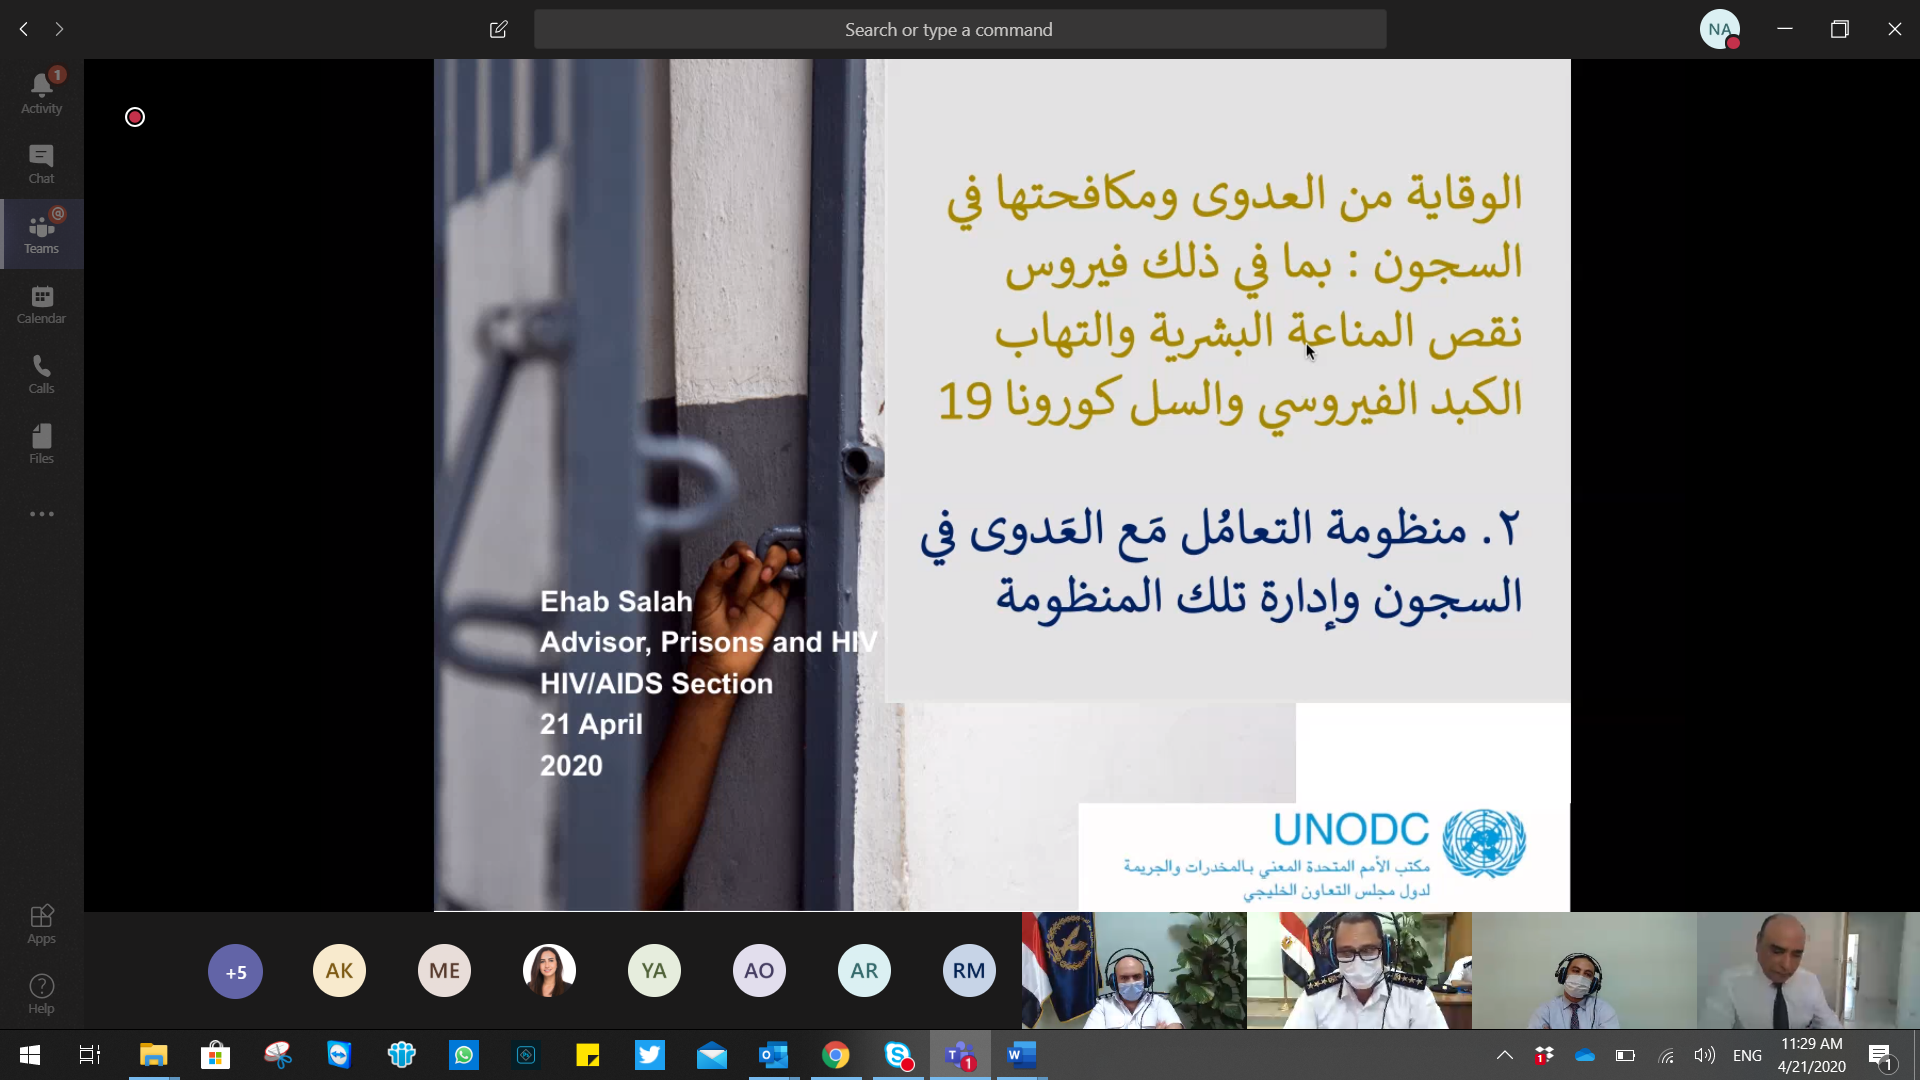 /romena/uploads/res/Stories/prison-health-is-public-health_-unodc-supports-covid-19-preparedness-and-responses-in-prisons-in-egypt_html/2.png